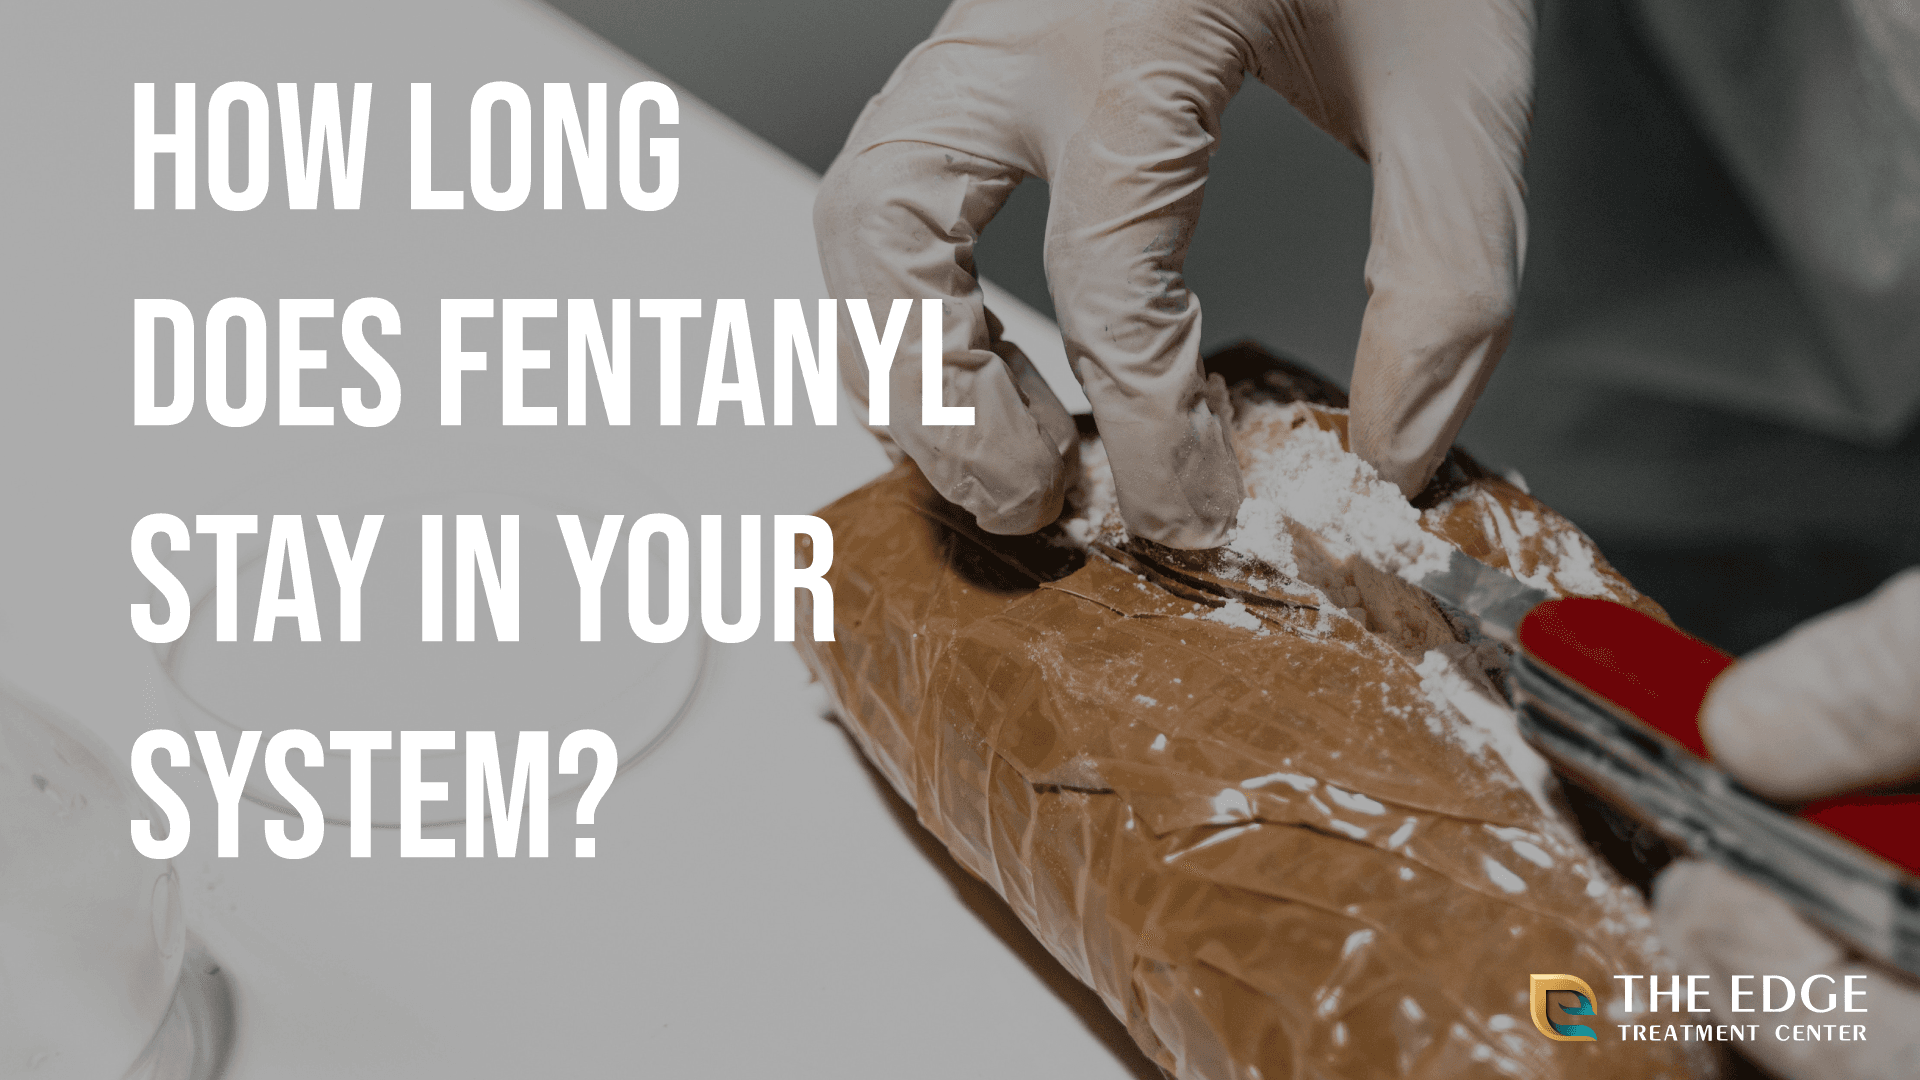 Fentanyl Addiction: How Long Does It Stay In Your System?